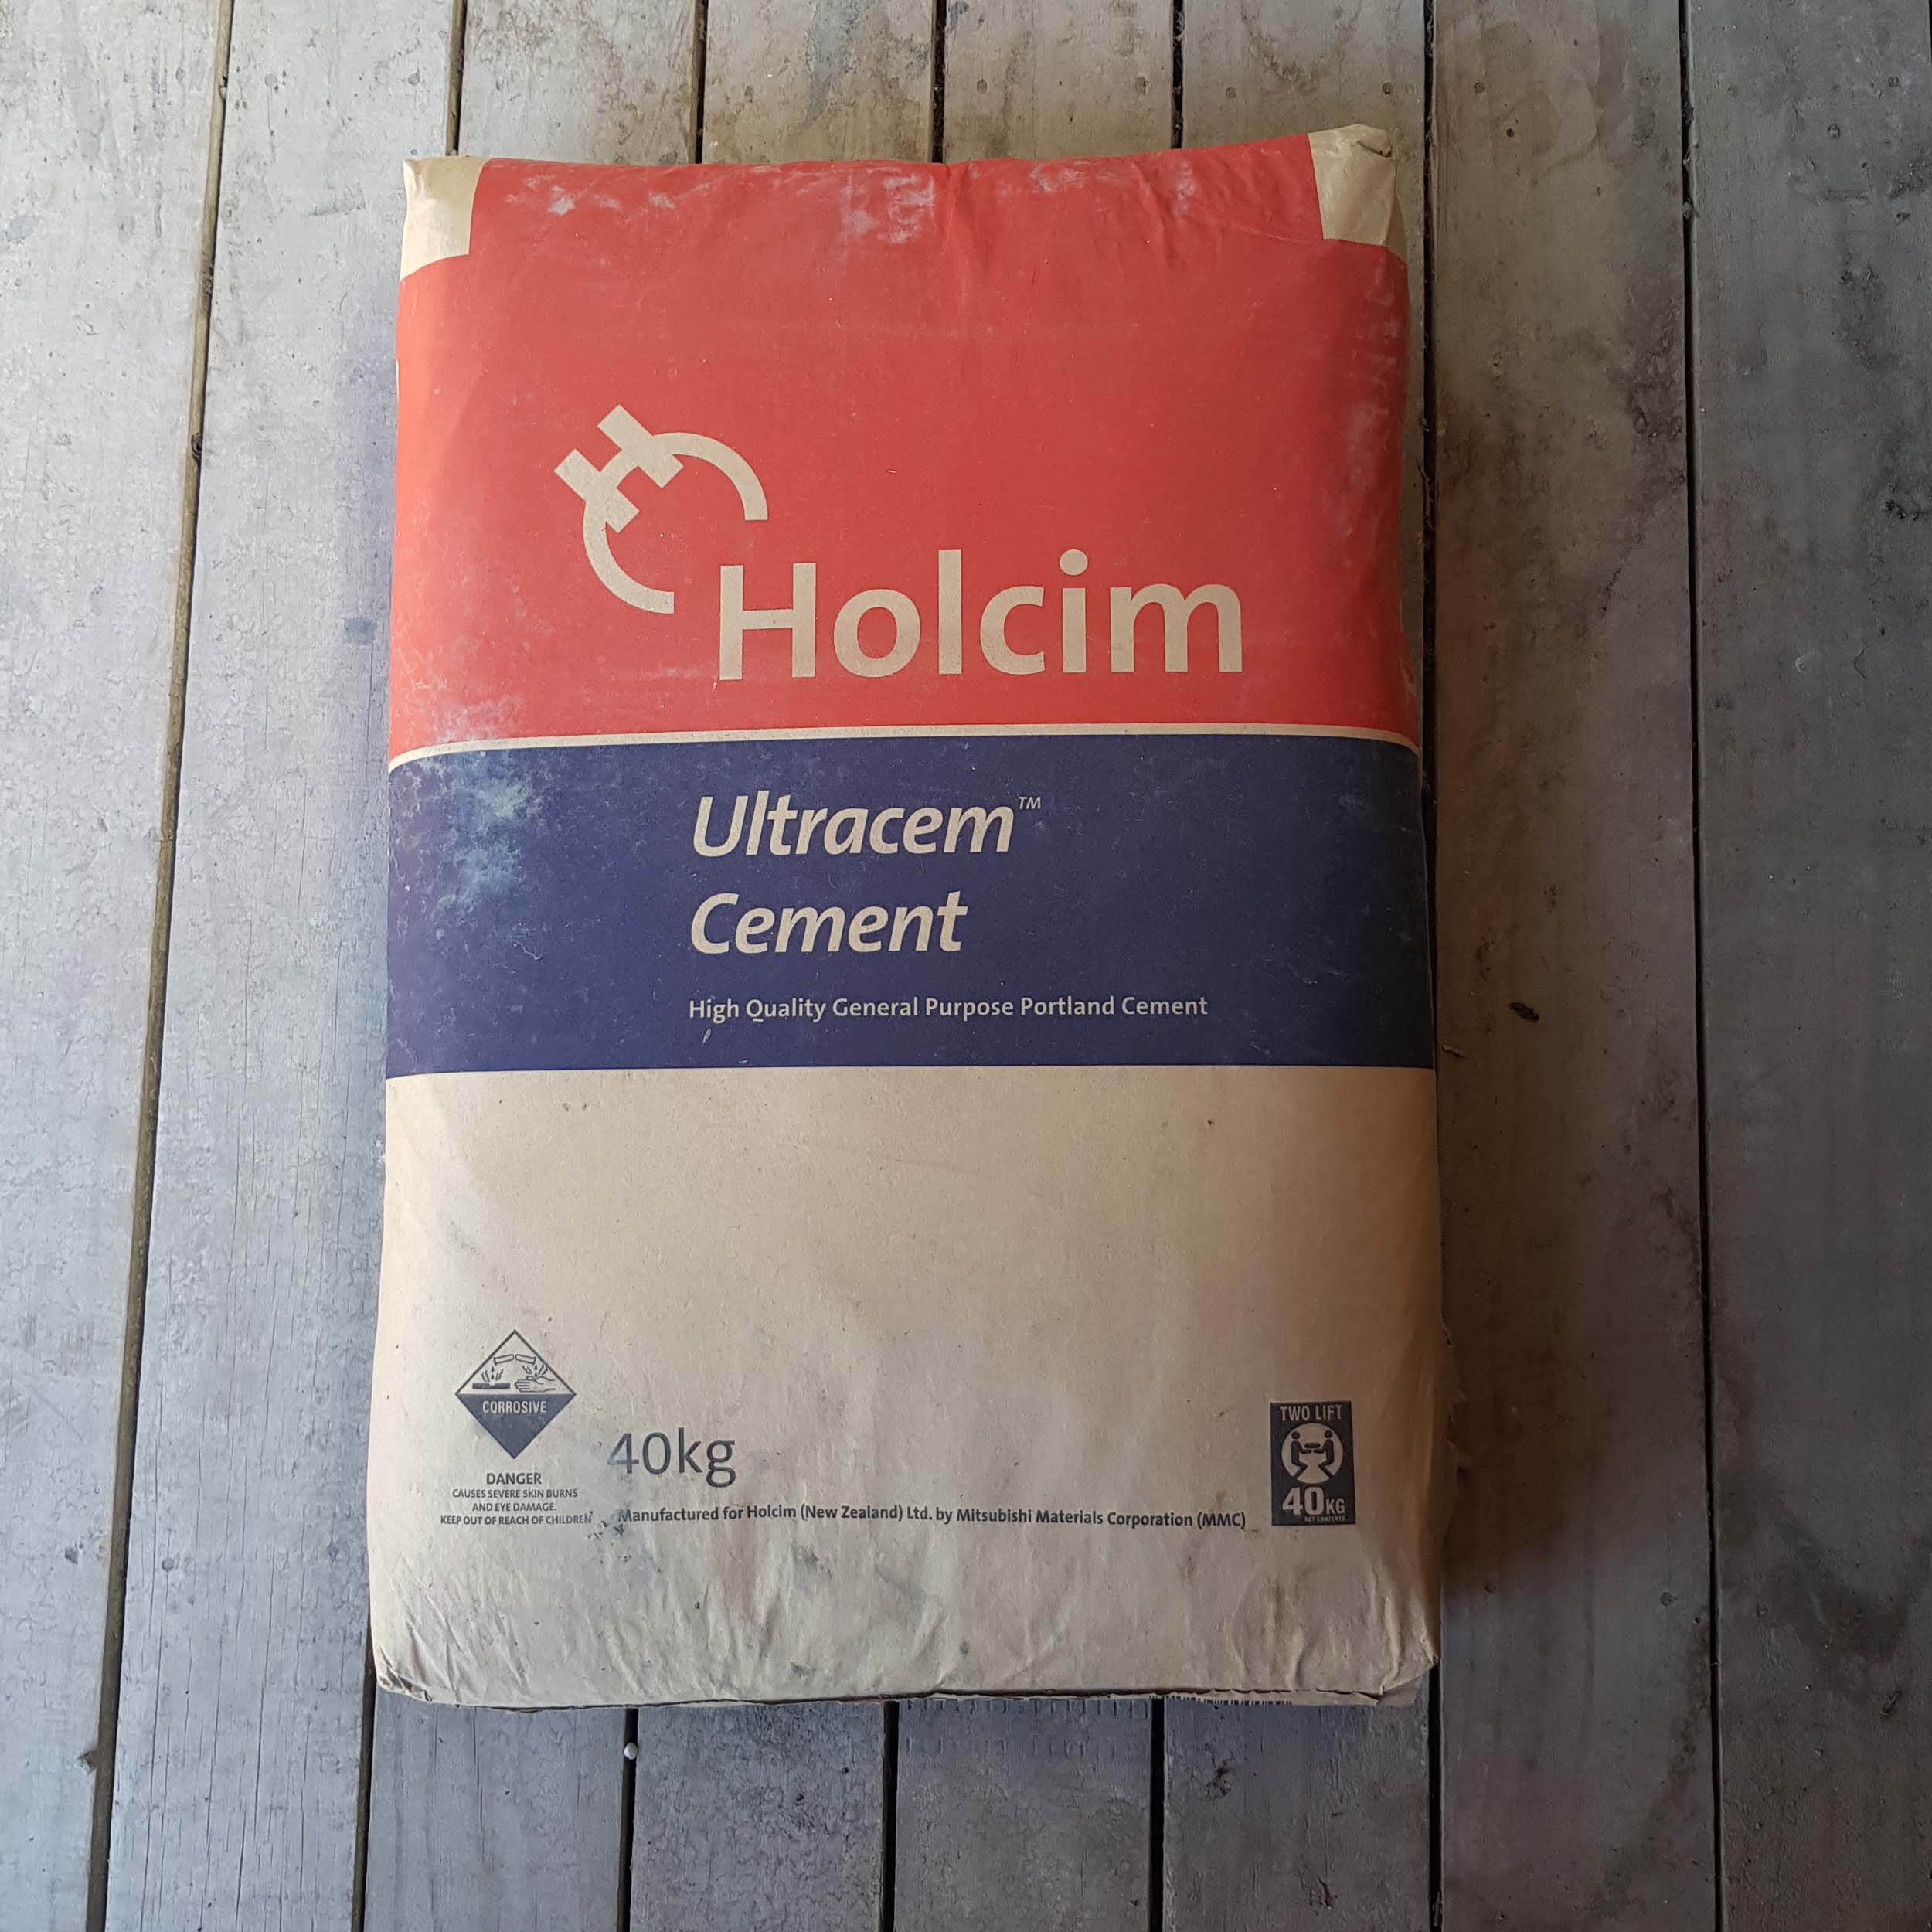 The Volume of One Bag of Cement | PDF | Volume | Concrete